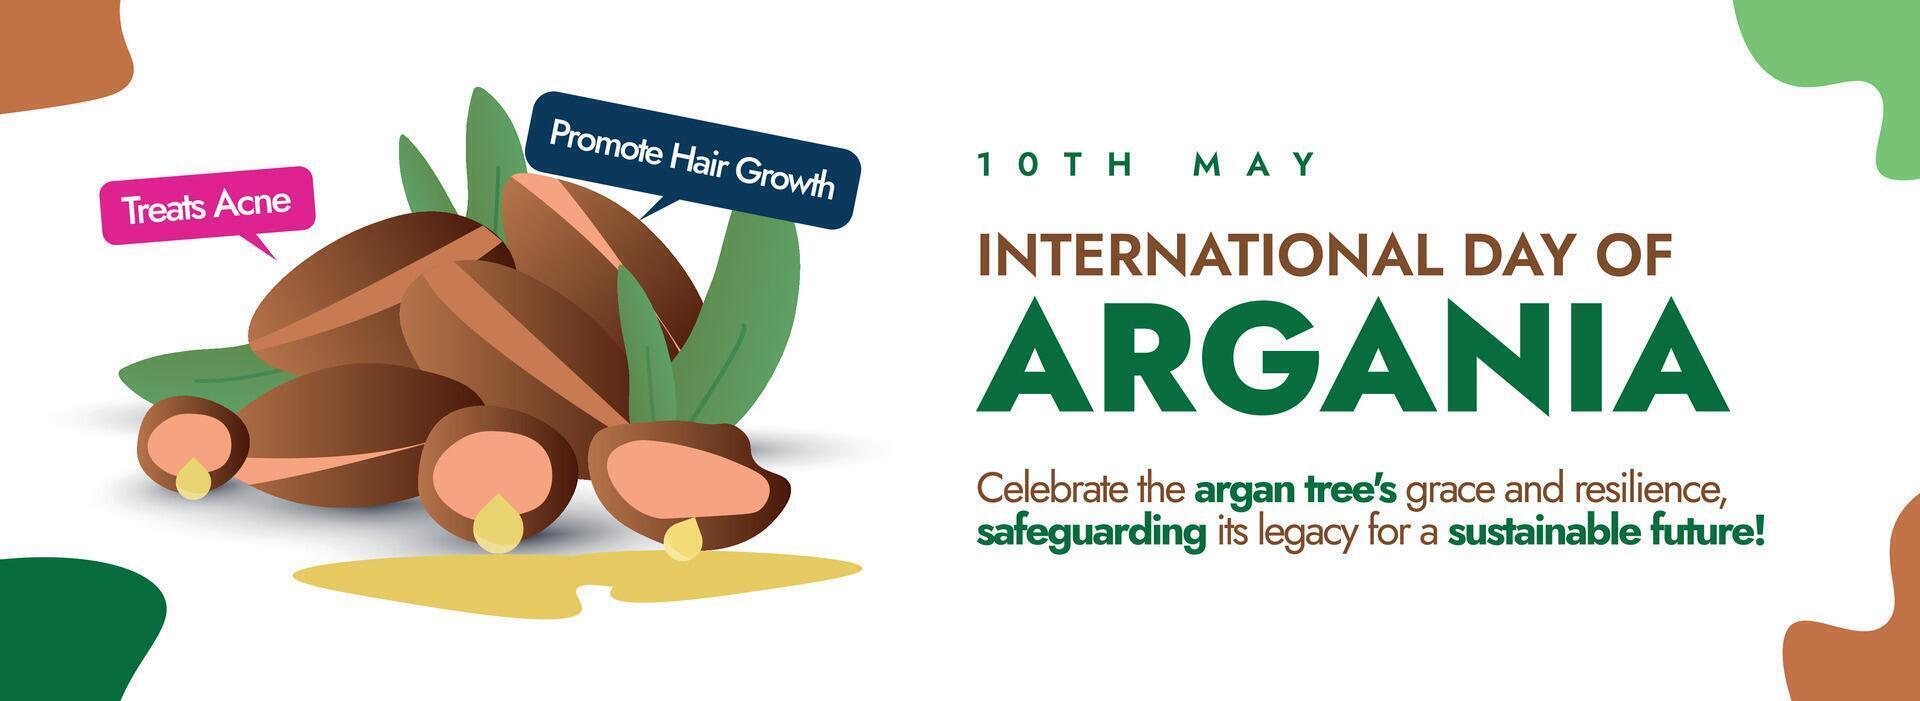 International day of Argania. 10th May International day of Argania celebration post, cover banner, card with argan seeds. This day celebrates the argan trees they play crucial role in environment vector